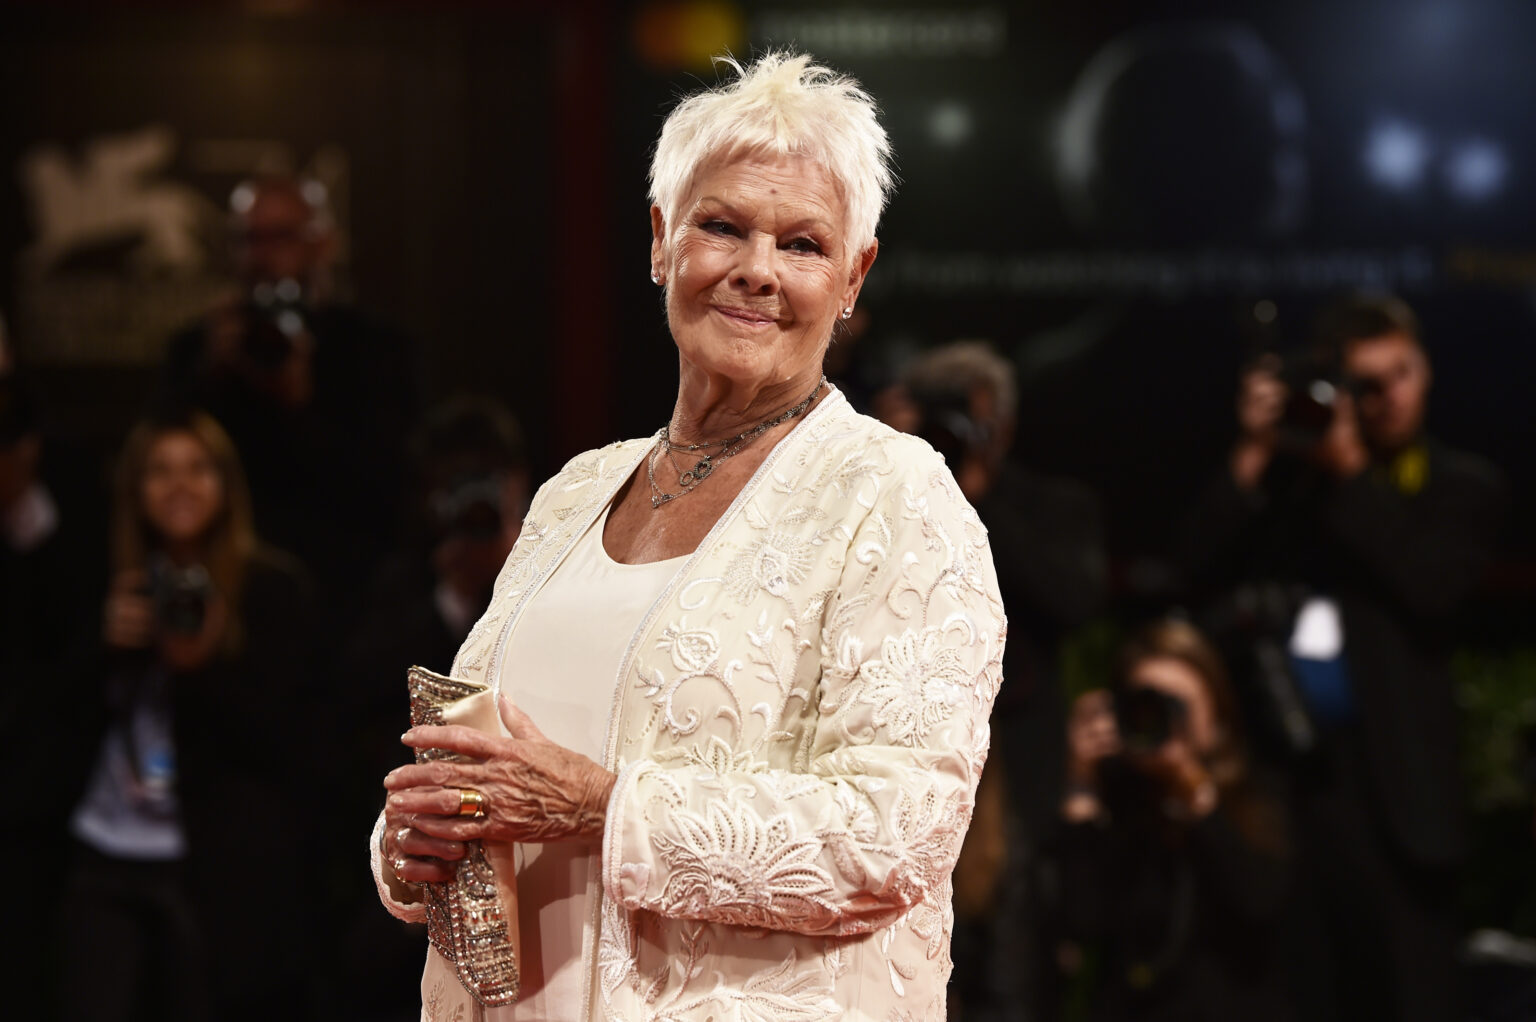 Dame Judi Dench, 87, can’t read anymore due to advanced macular degeneration: ‘I can’t see – it’s bad’